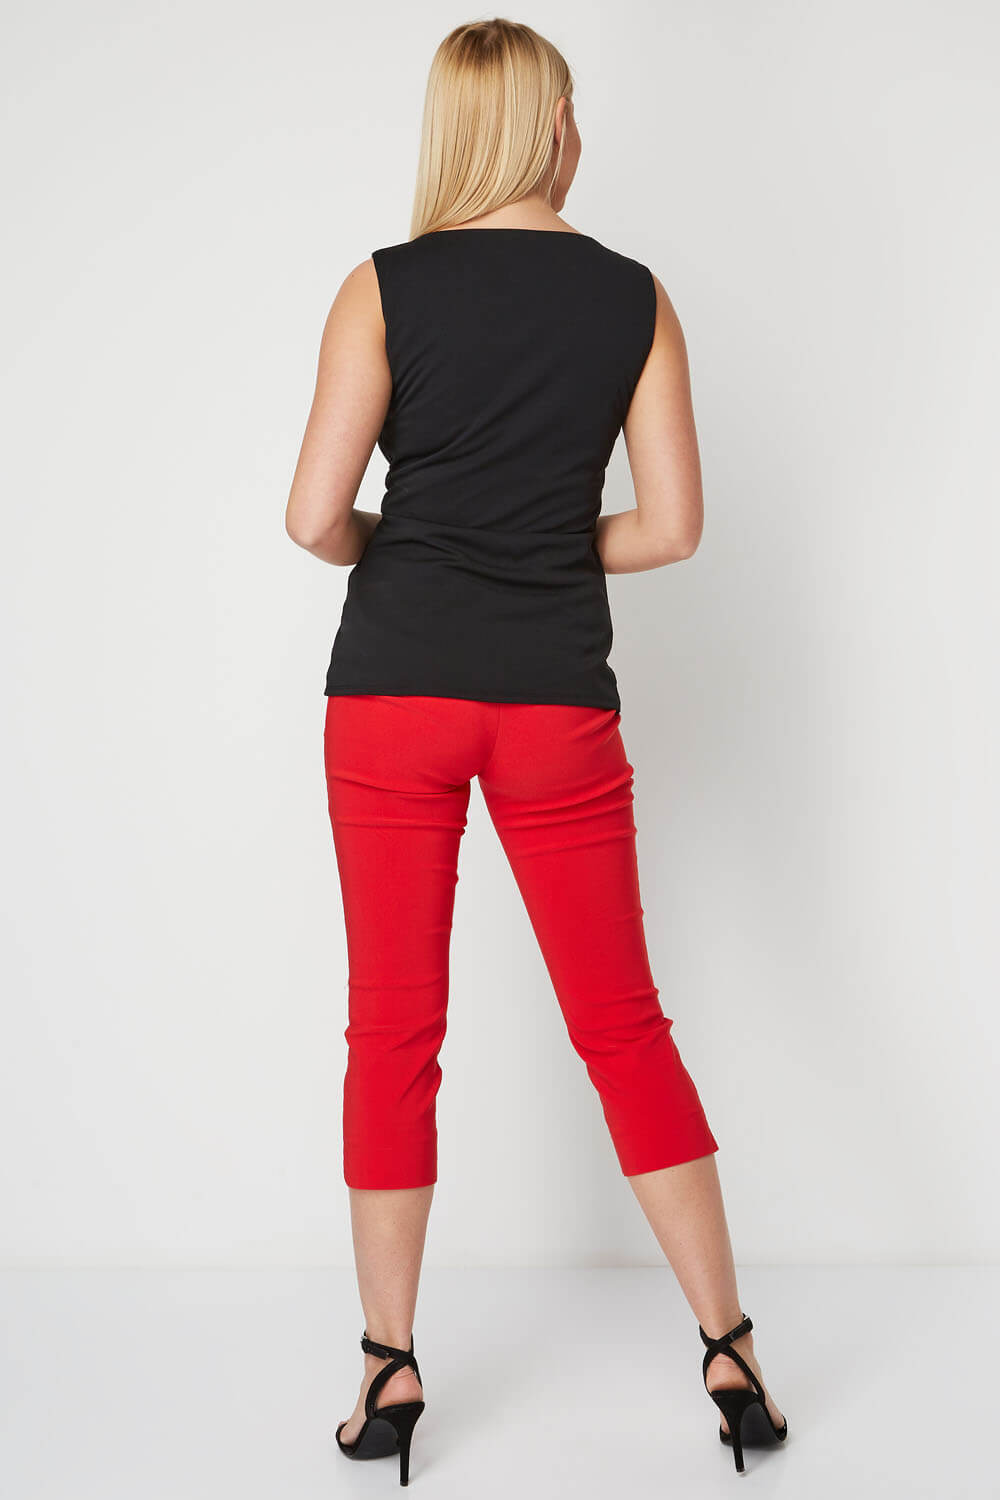 Black Sleeveless Knot Front Top , Image 3 of 8